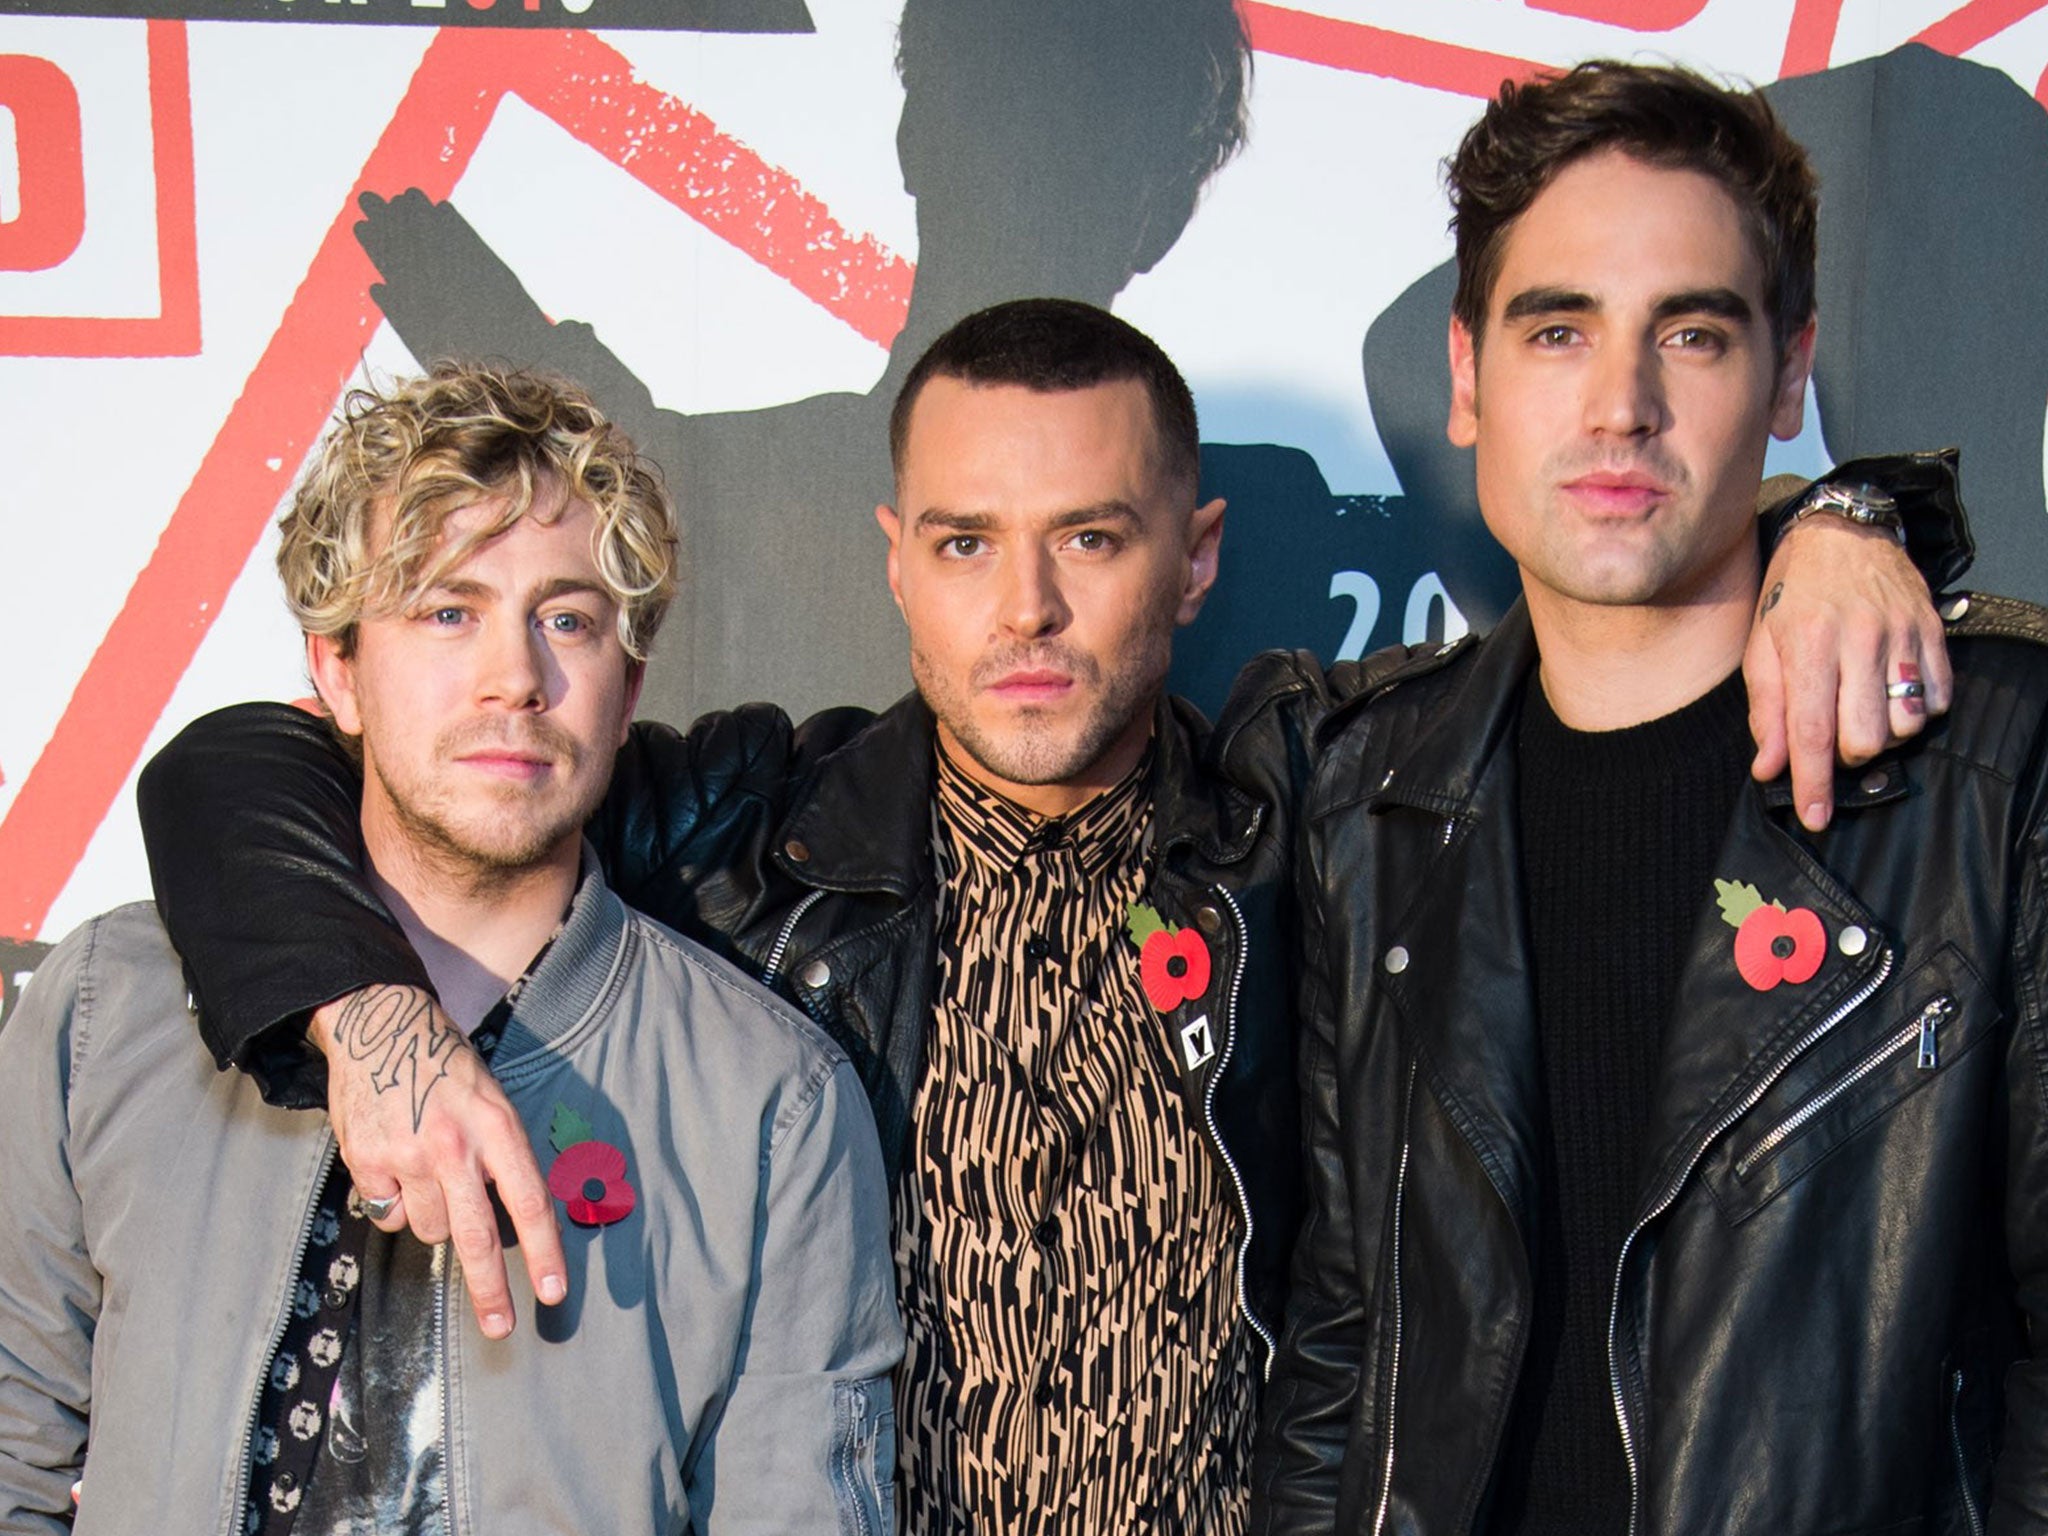 Busted members James Bourne, Matt Willis and Charlie Simpson